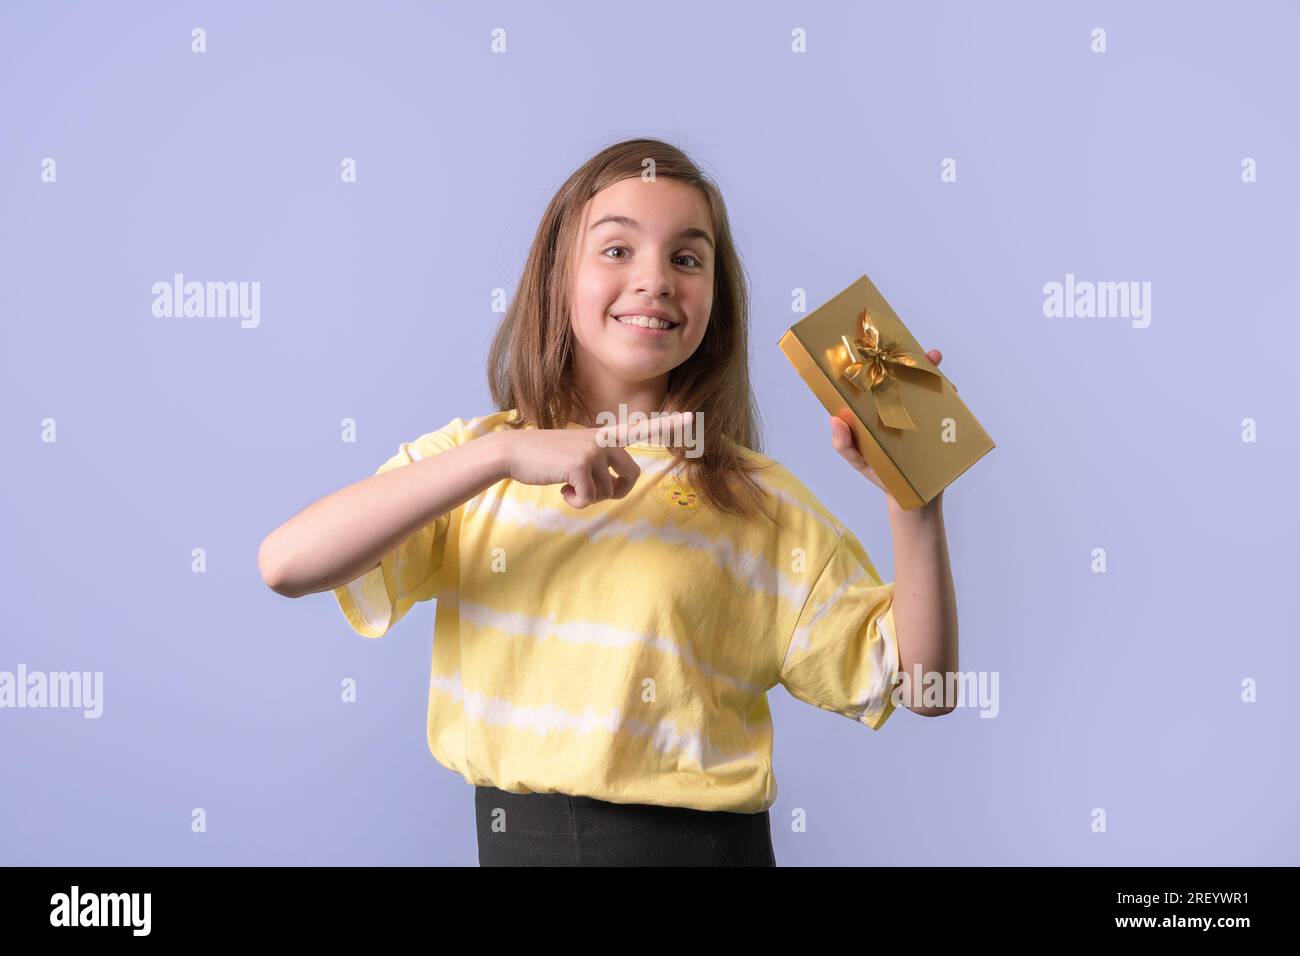 Joyful teenage girl holds a gift in a gilded package with a bow in her hands. lilac background Stock Photo